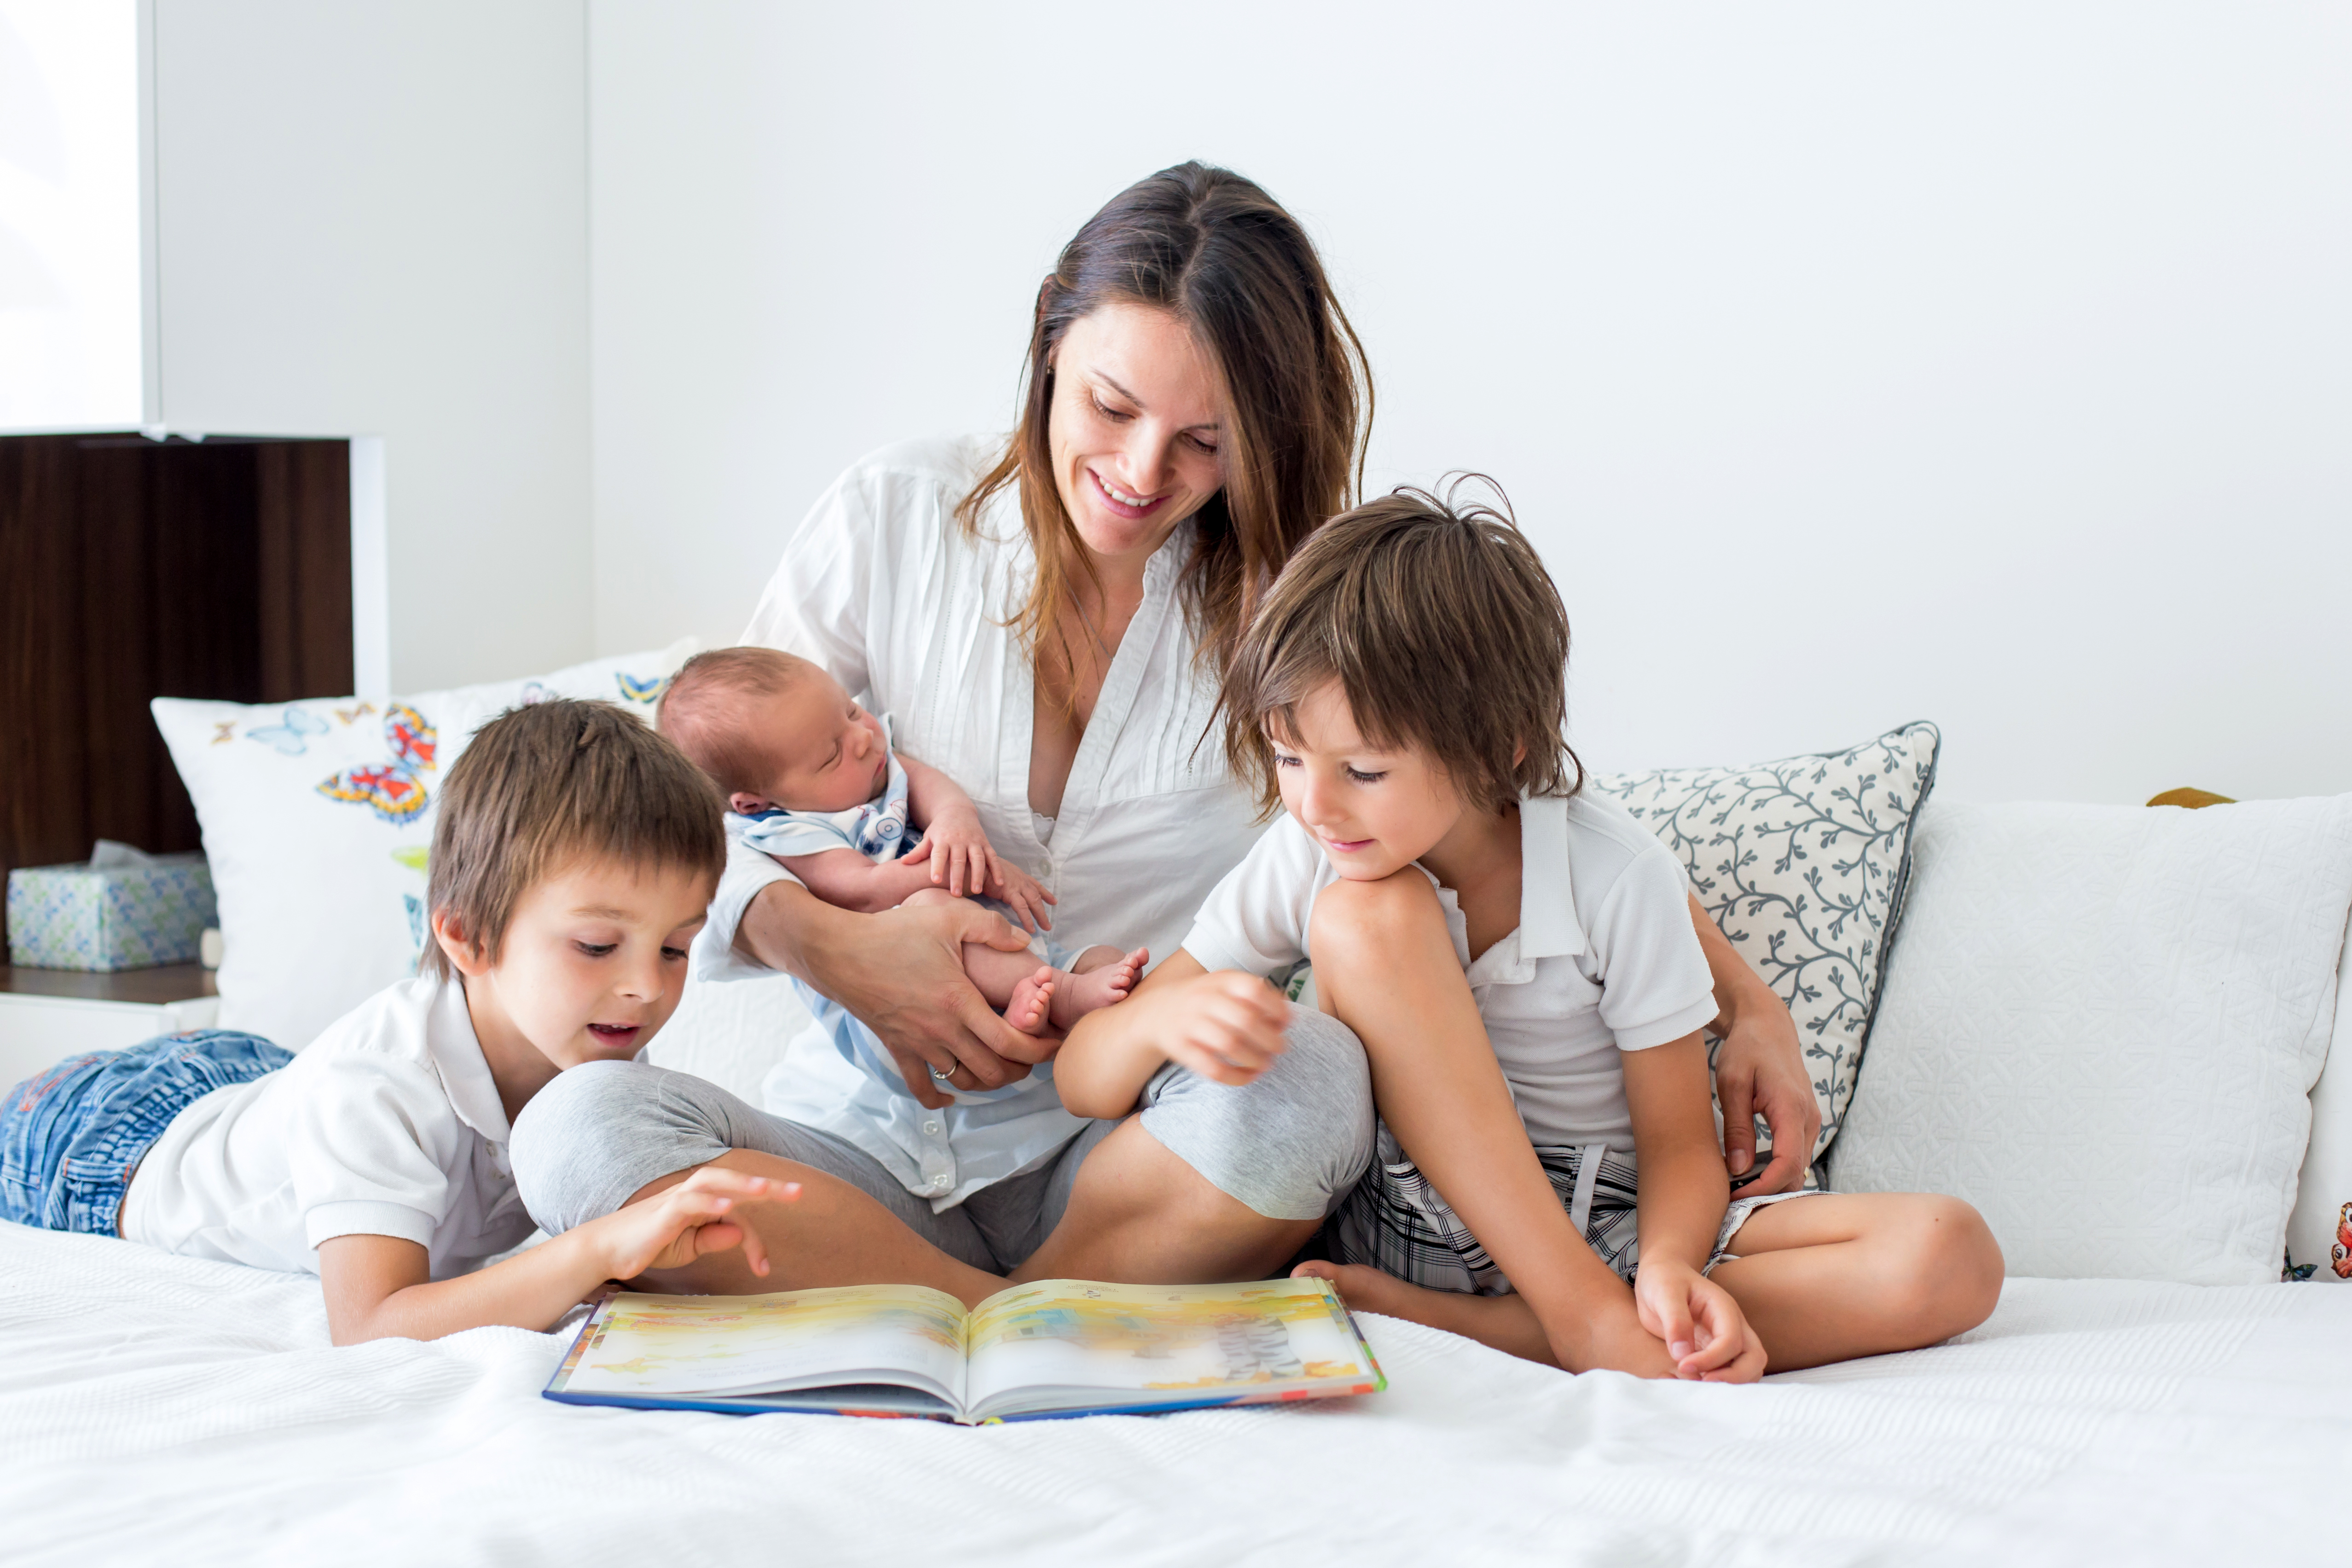 A young mother reads a book to her three little children | Source: Shutterstock